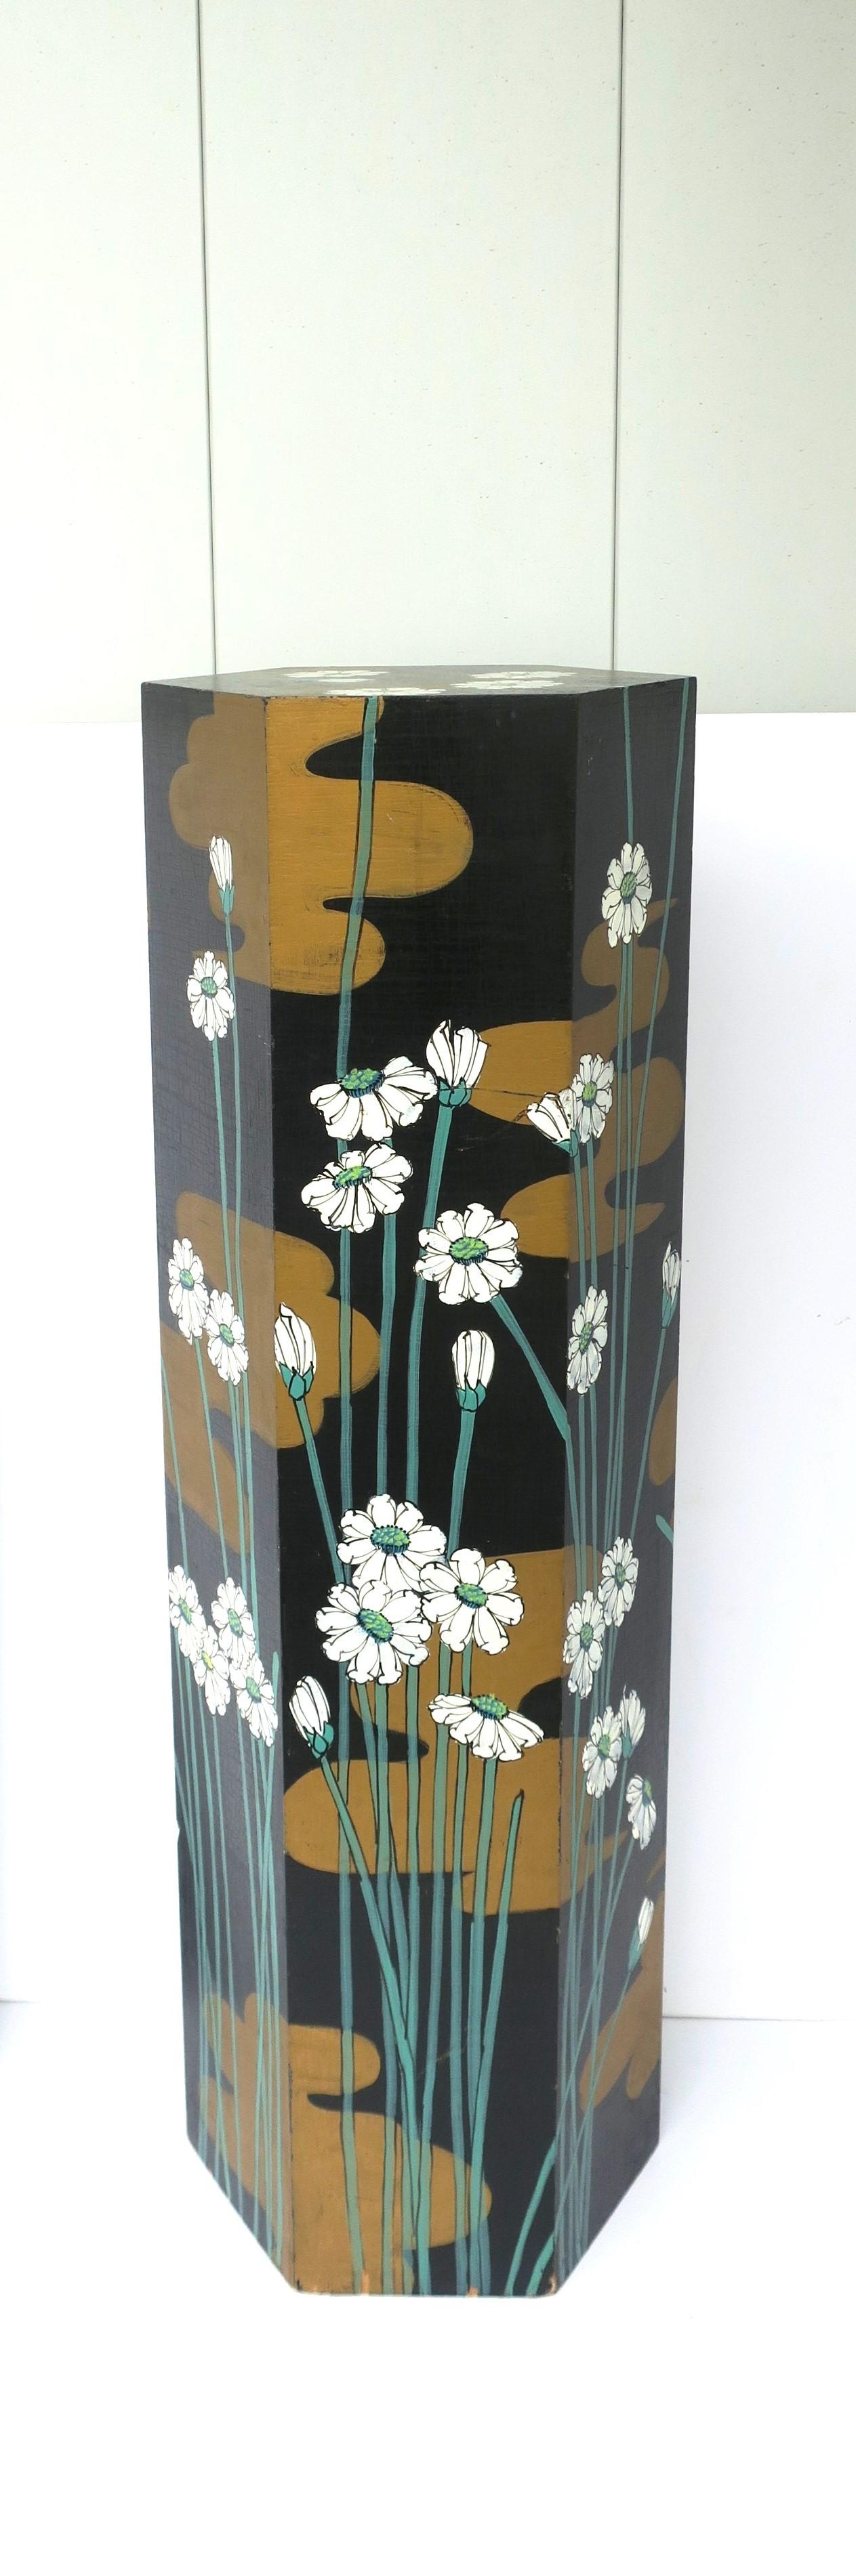 A wood pedestal column stand, in the Art Nouveau style, circa mid-20th century. This wood pedestal column stand is hand-painted with beautiful Lilly pads and flowers, in a hexagon shape (a nice alternative to round or square.) Lilly pads and flowers